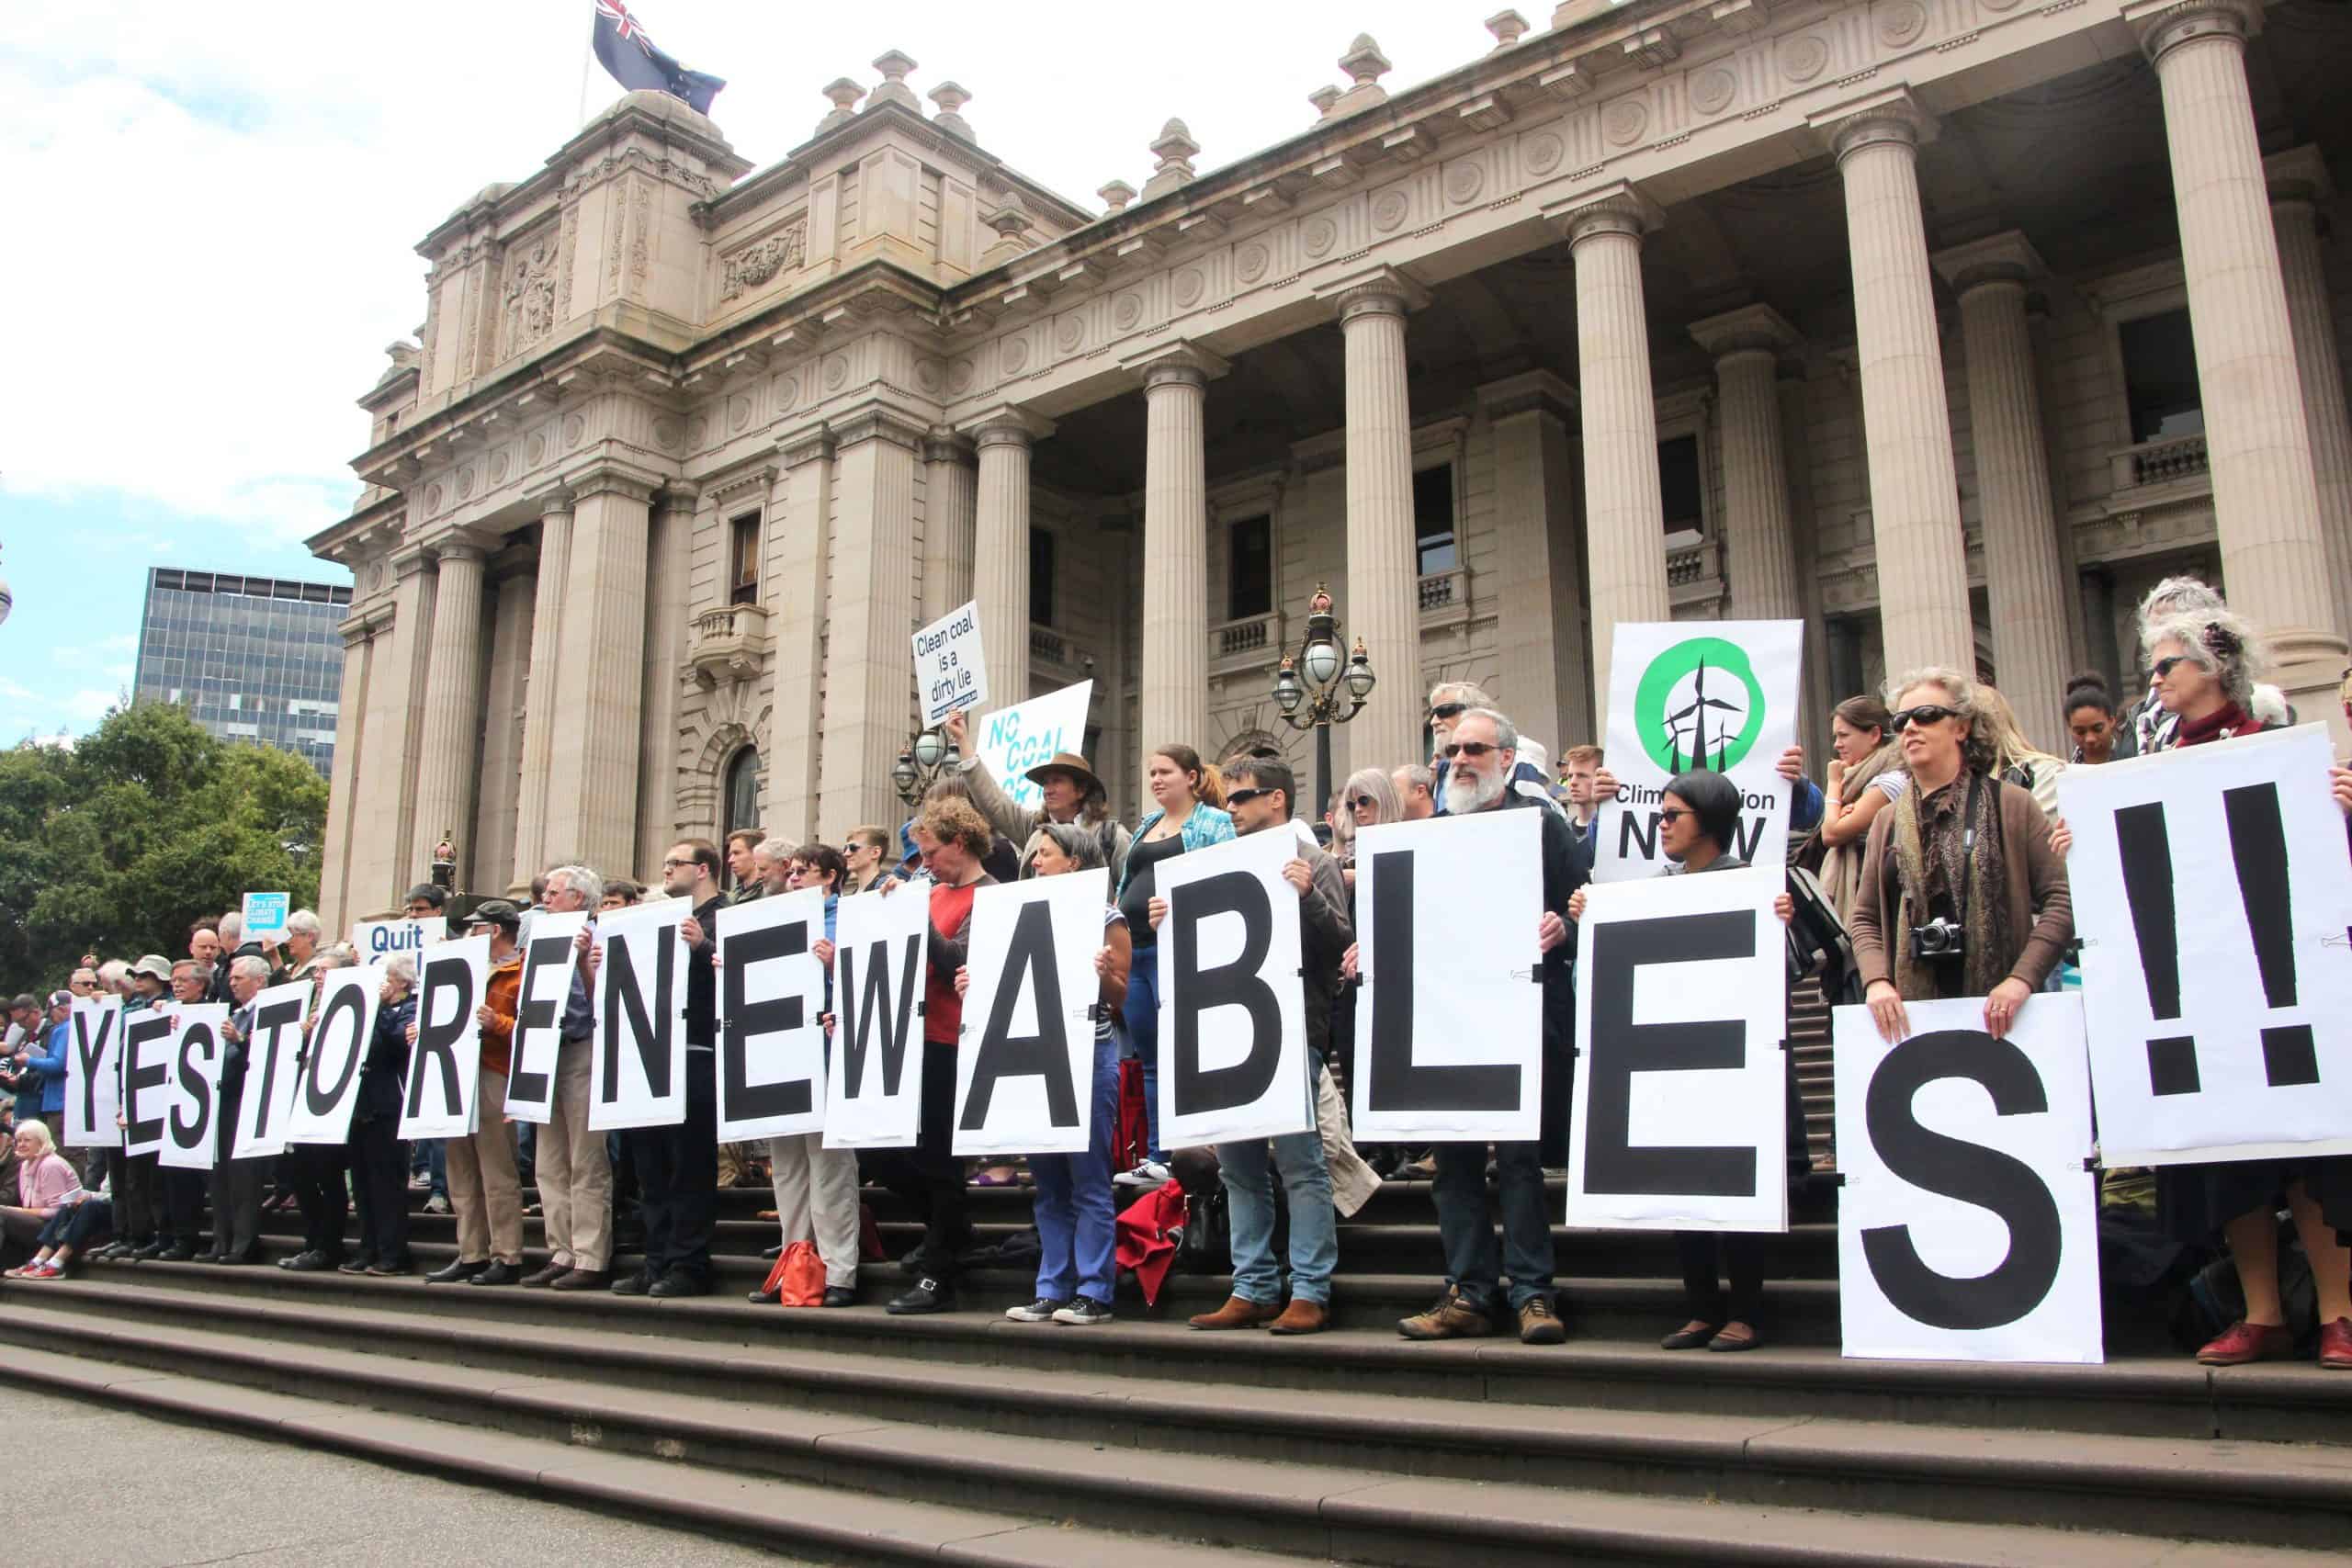 Protestors standing on the steps of the Victorian Parliament building. Each person is holding a poster with a letter that spells out Renewables!!